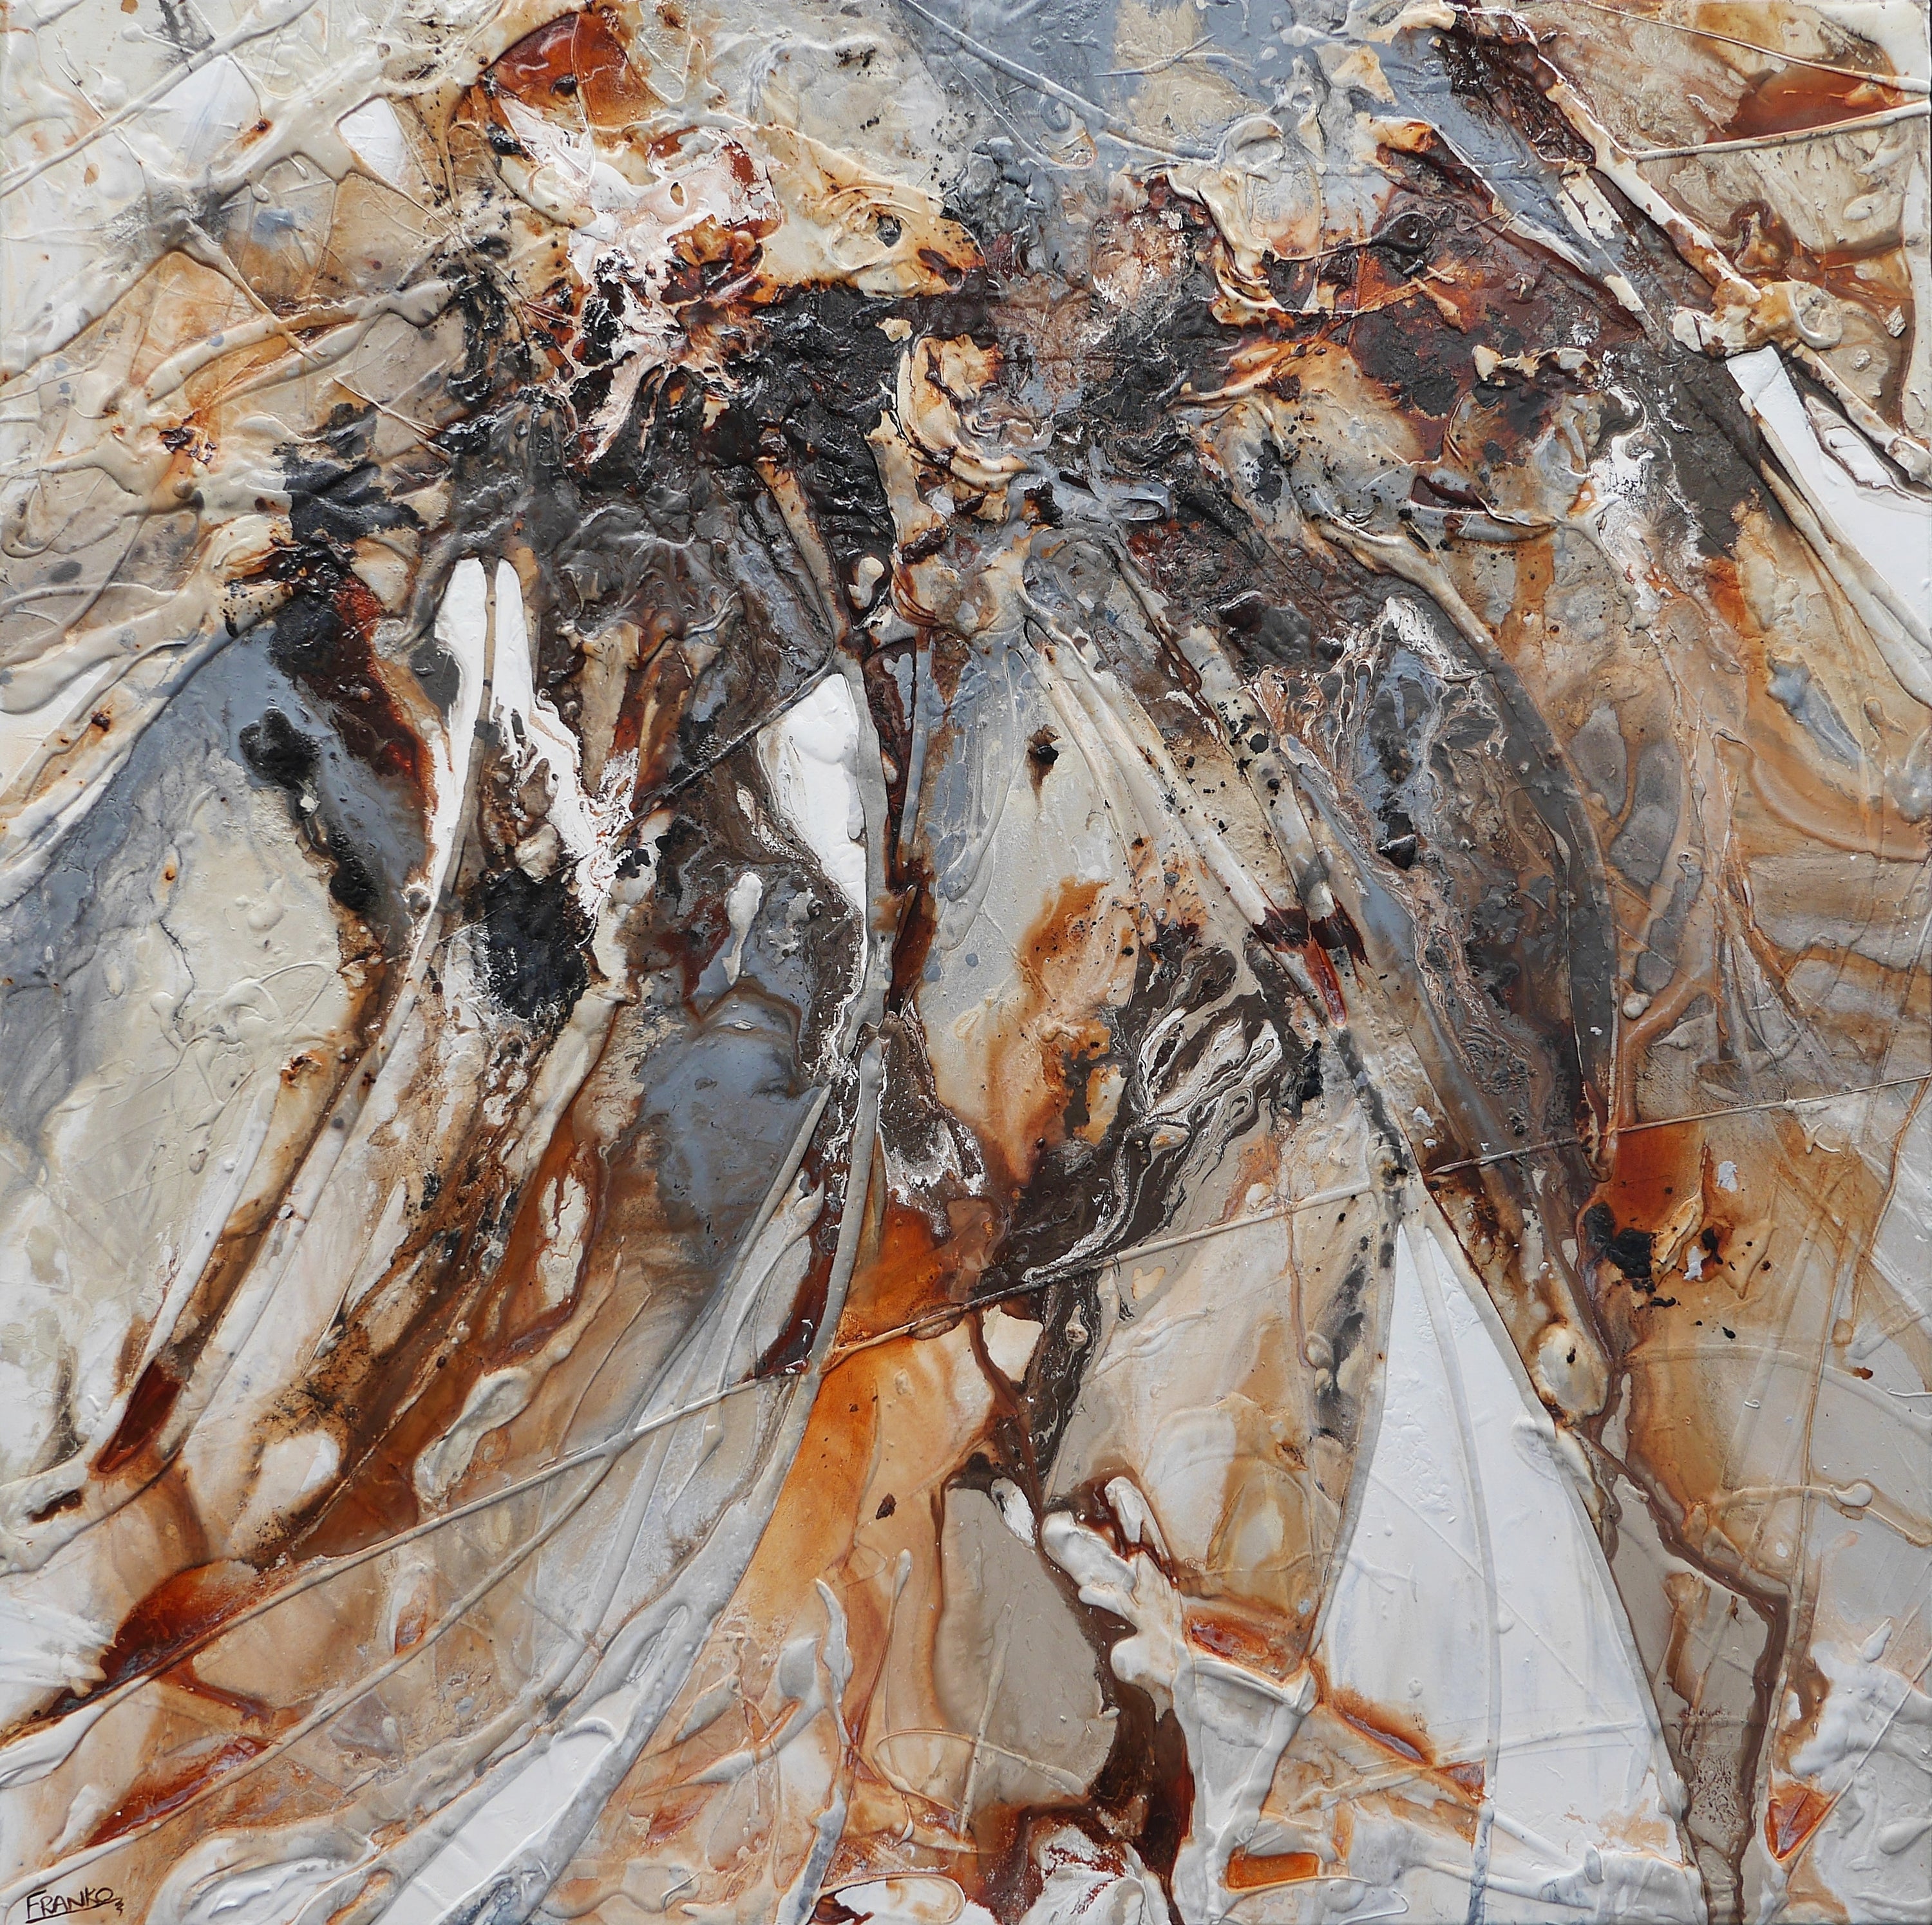 Nara Rust 150cm x 150cm White Oxide Textured Abstract Painting (SOLD)